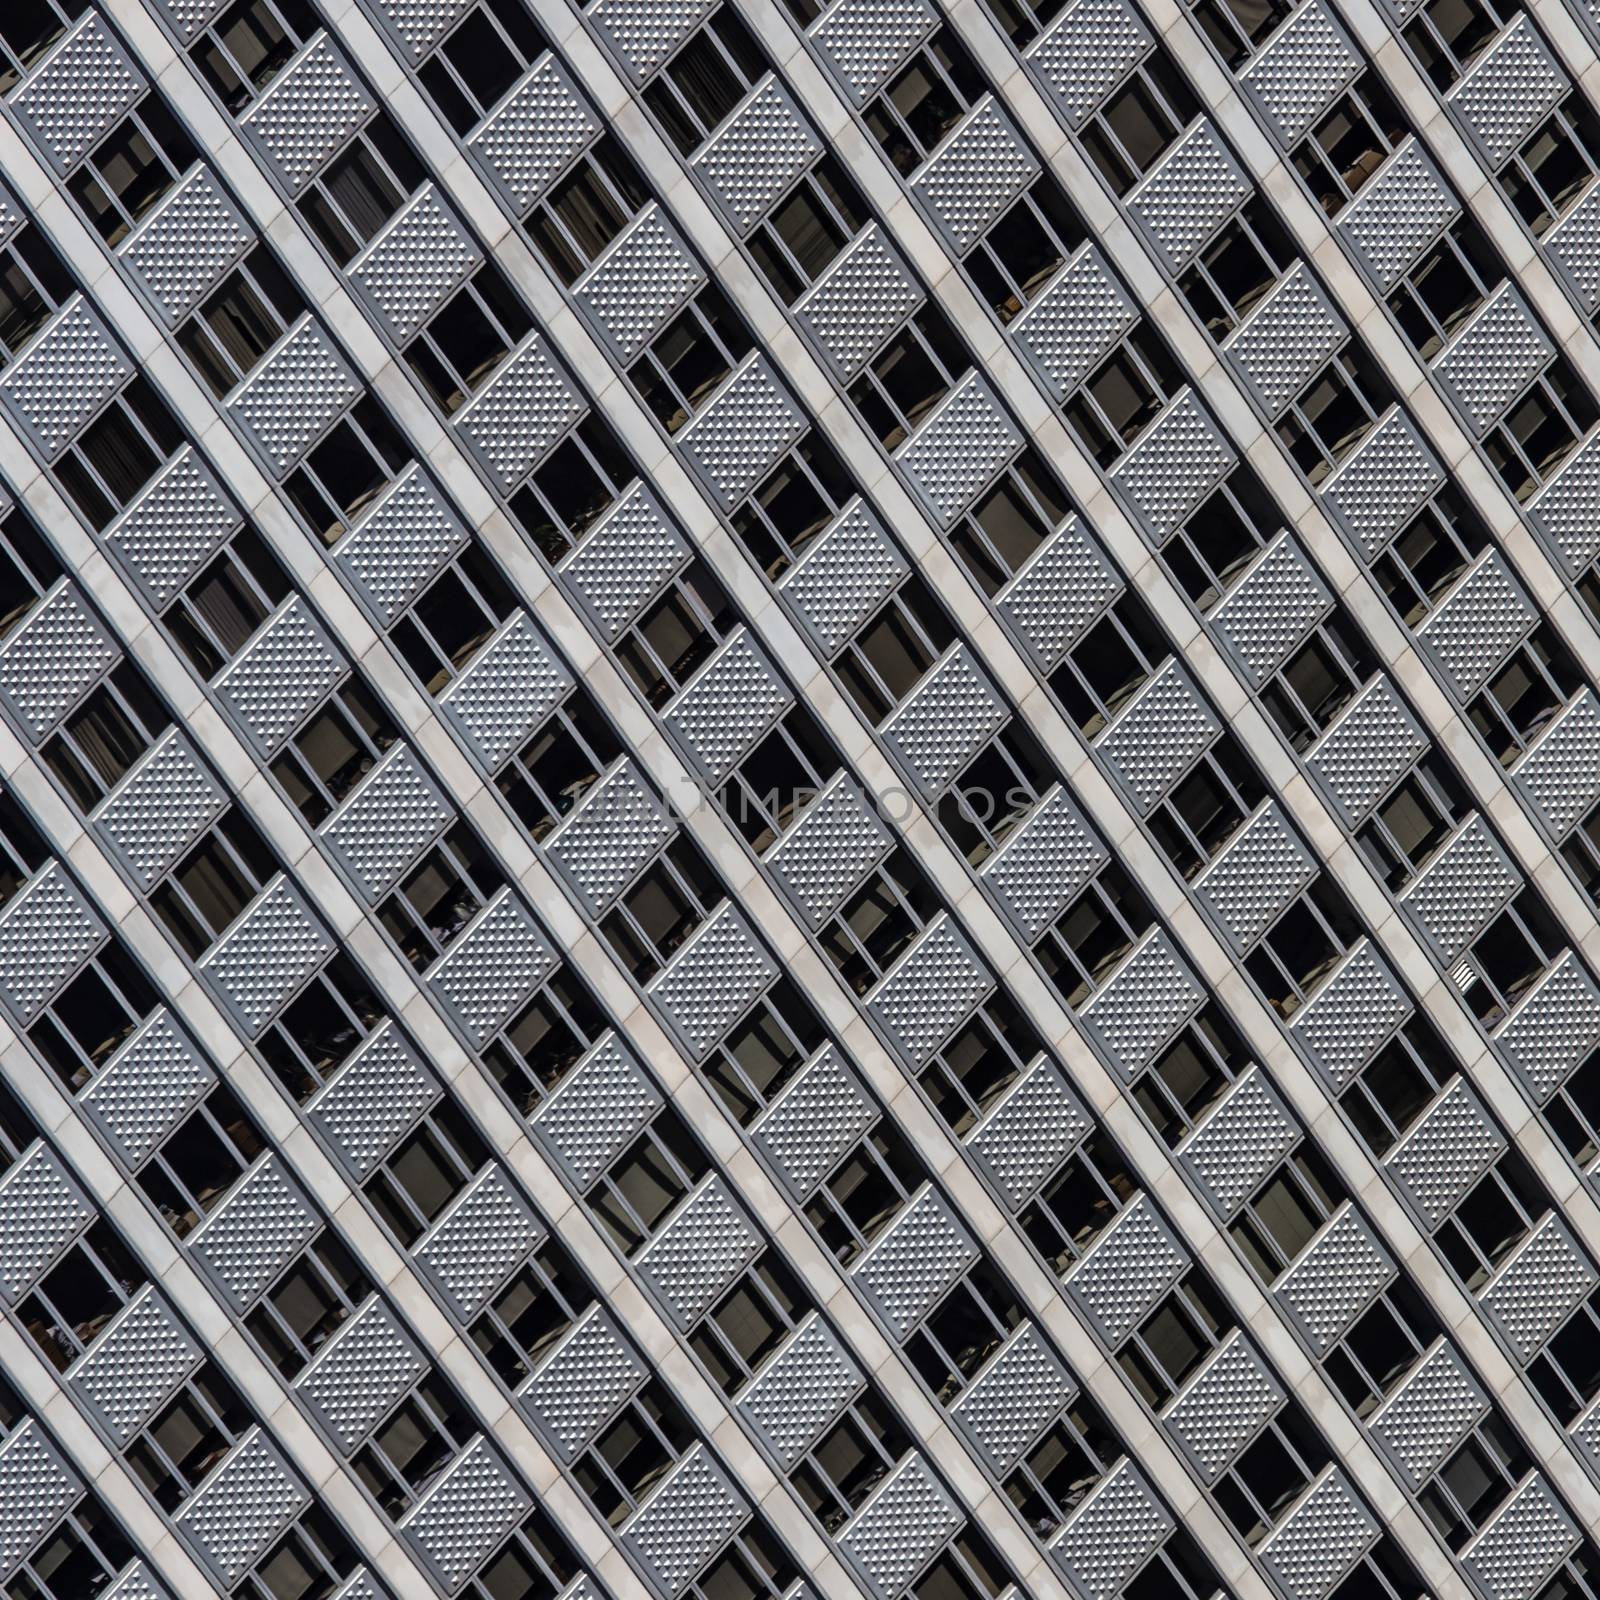 Windows of a modern office building. by kasto